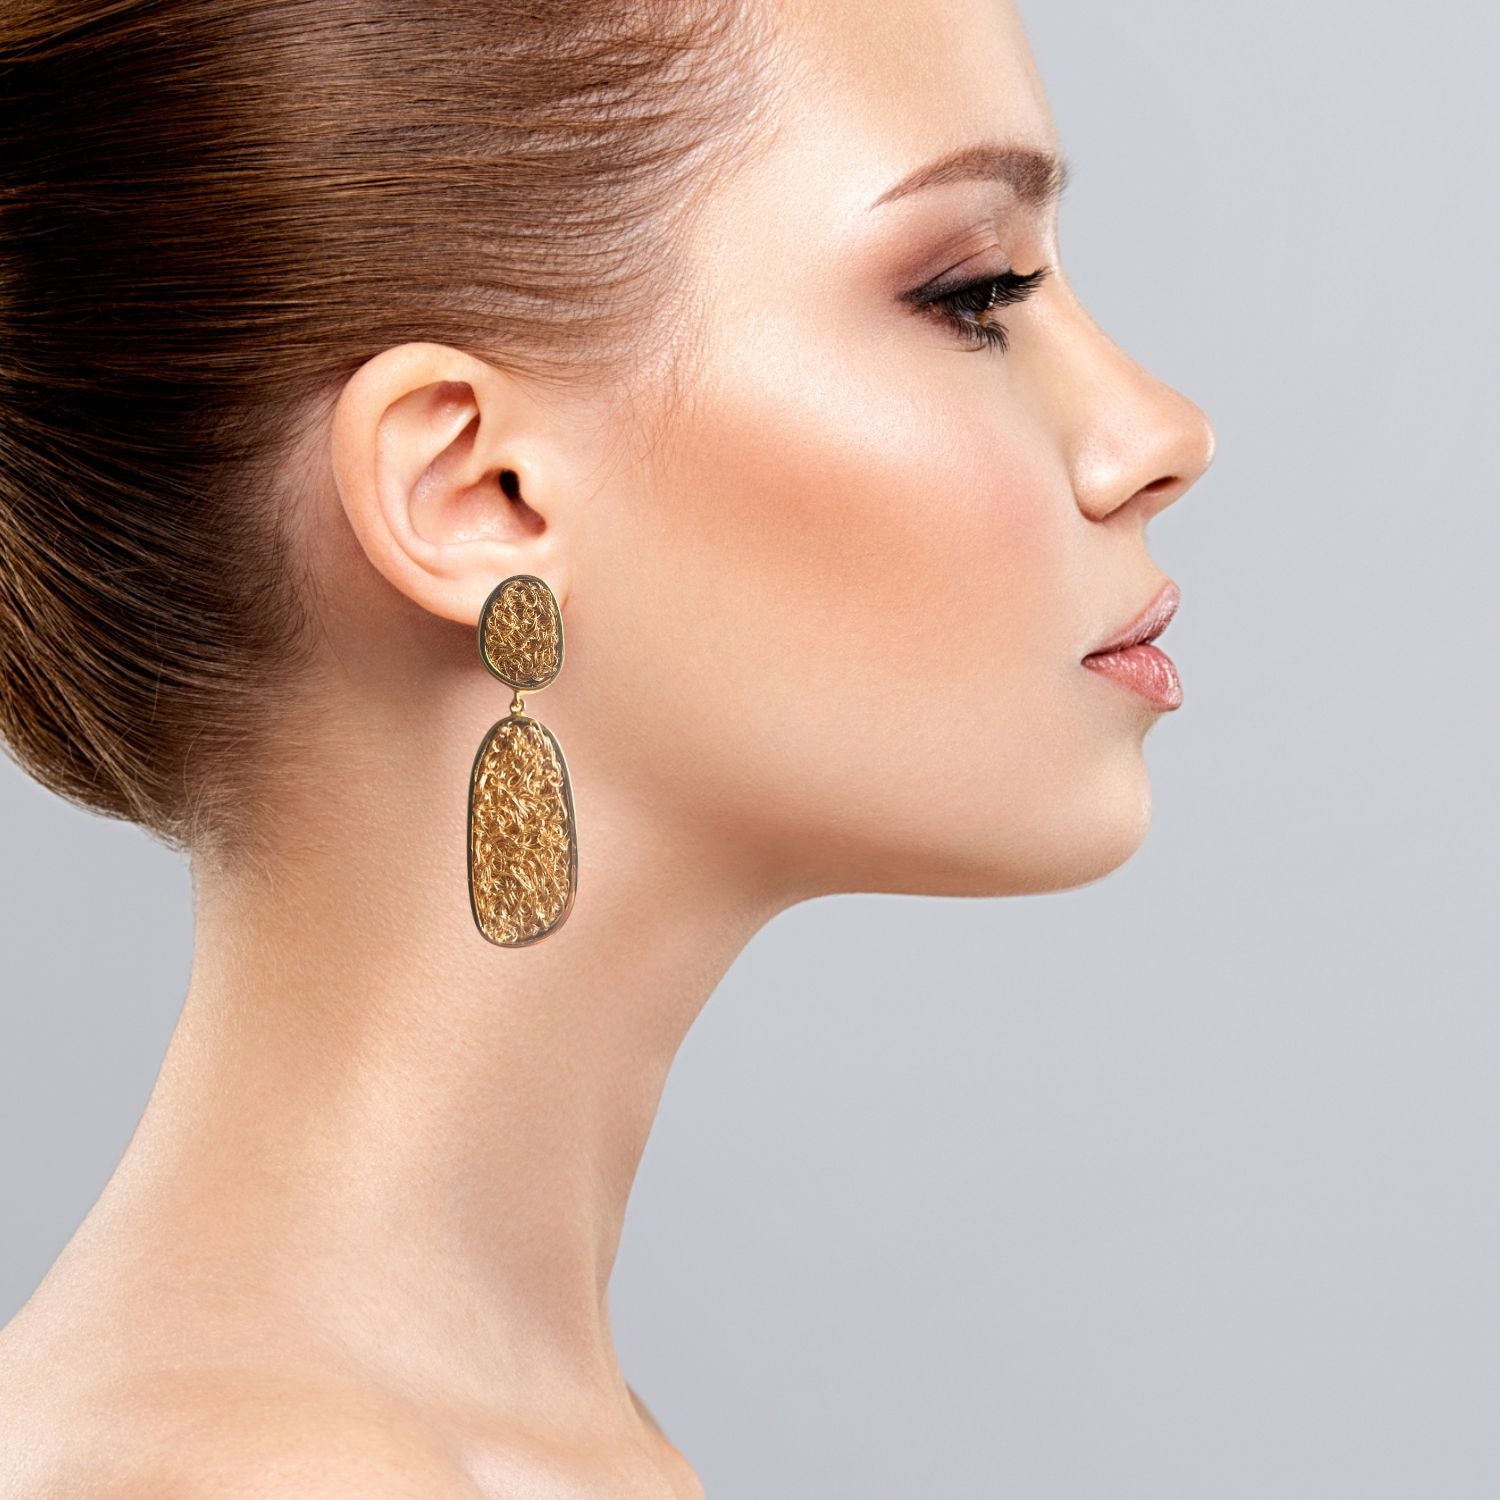 Artisan-crafted dangle earrings featuring delicate gold crochet work 